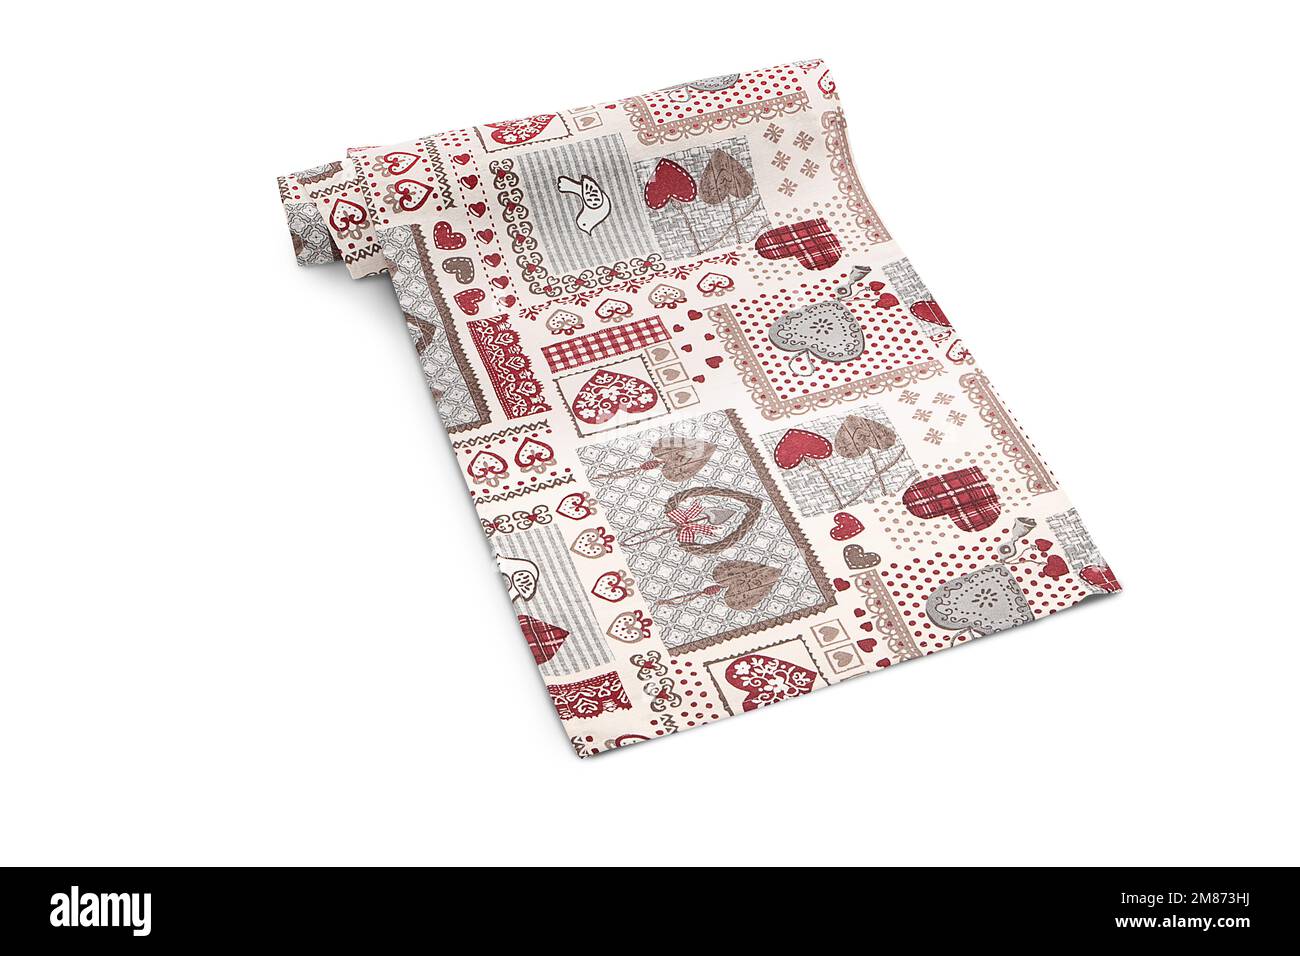 Table runner, napkin or kitchen placemat on cloth isolated or with plate, cutlery and glasses Stock Photo